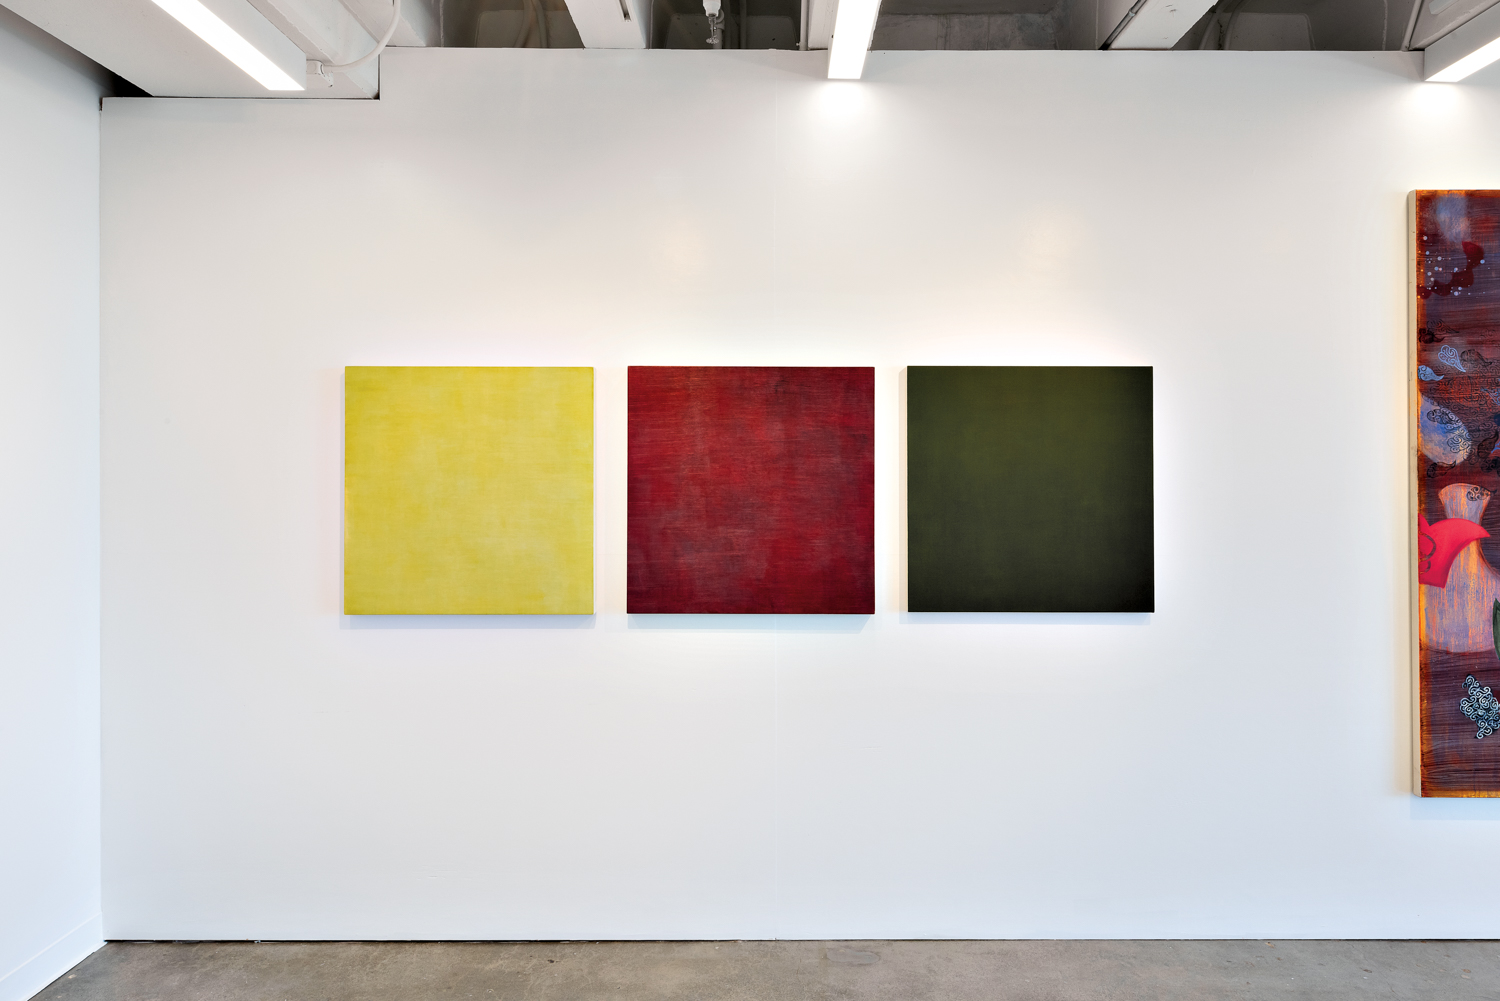 Three square artworks (one yellow, one red and one green) against a white wall